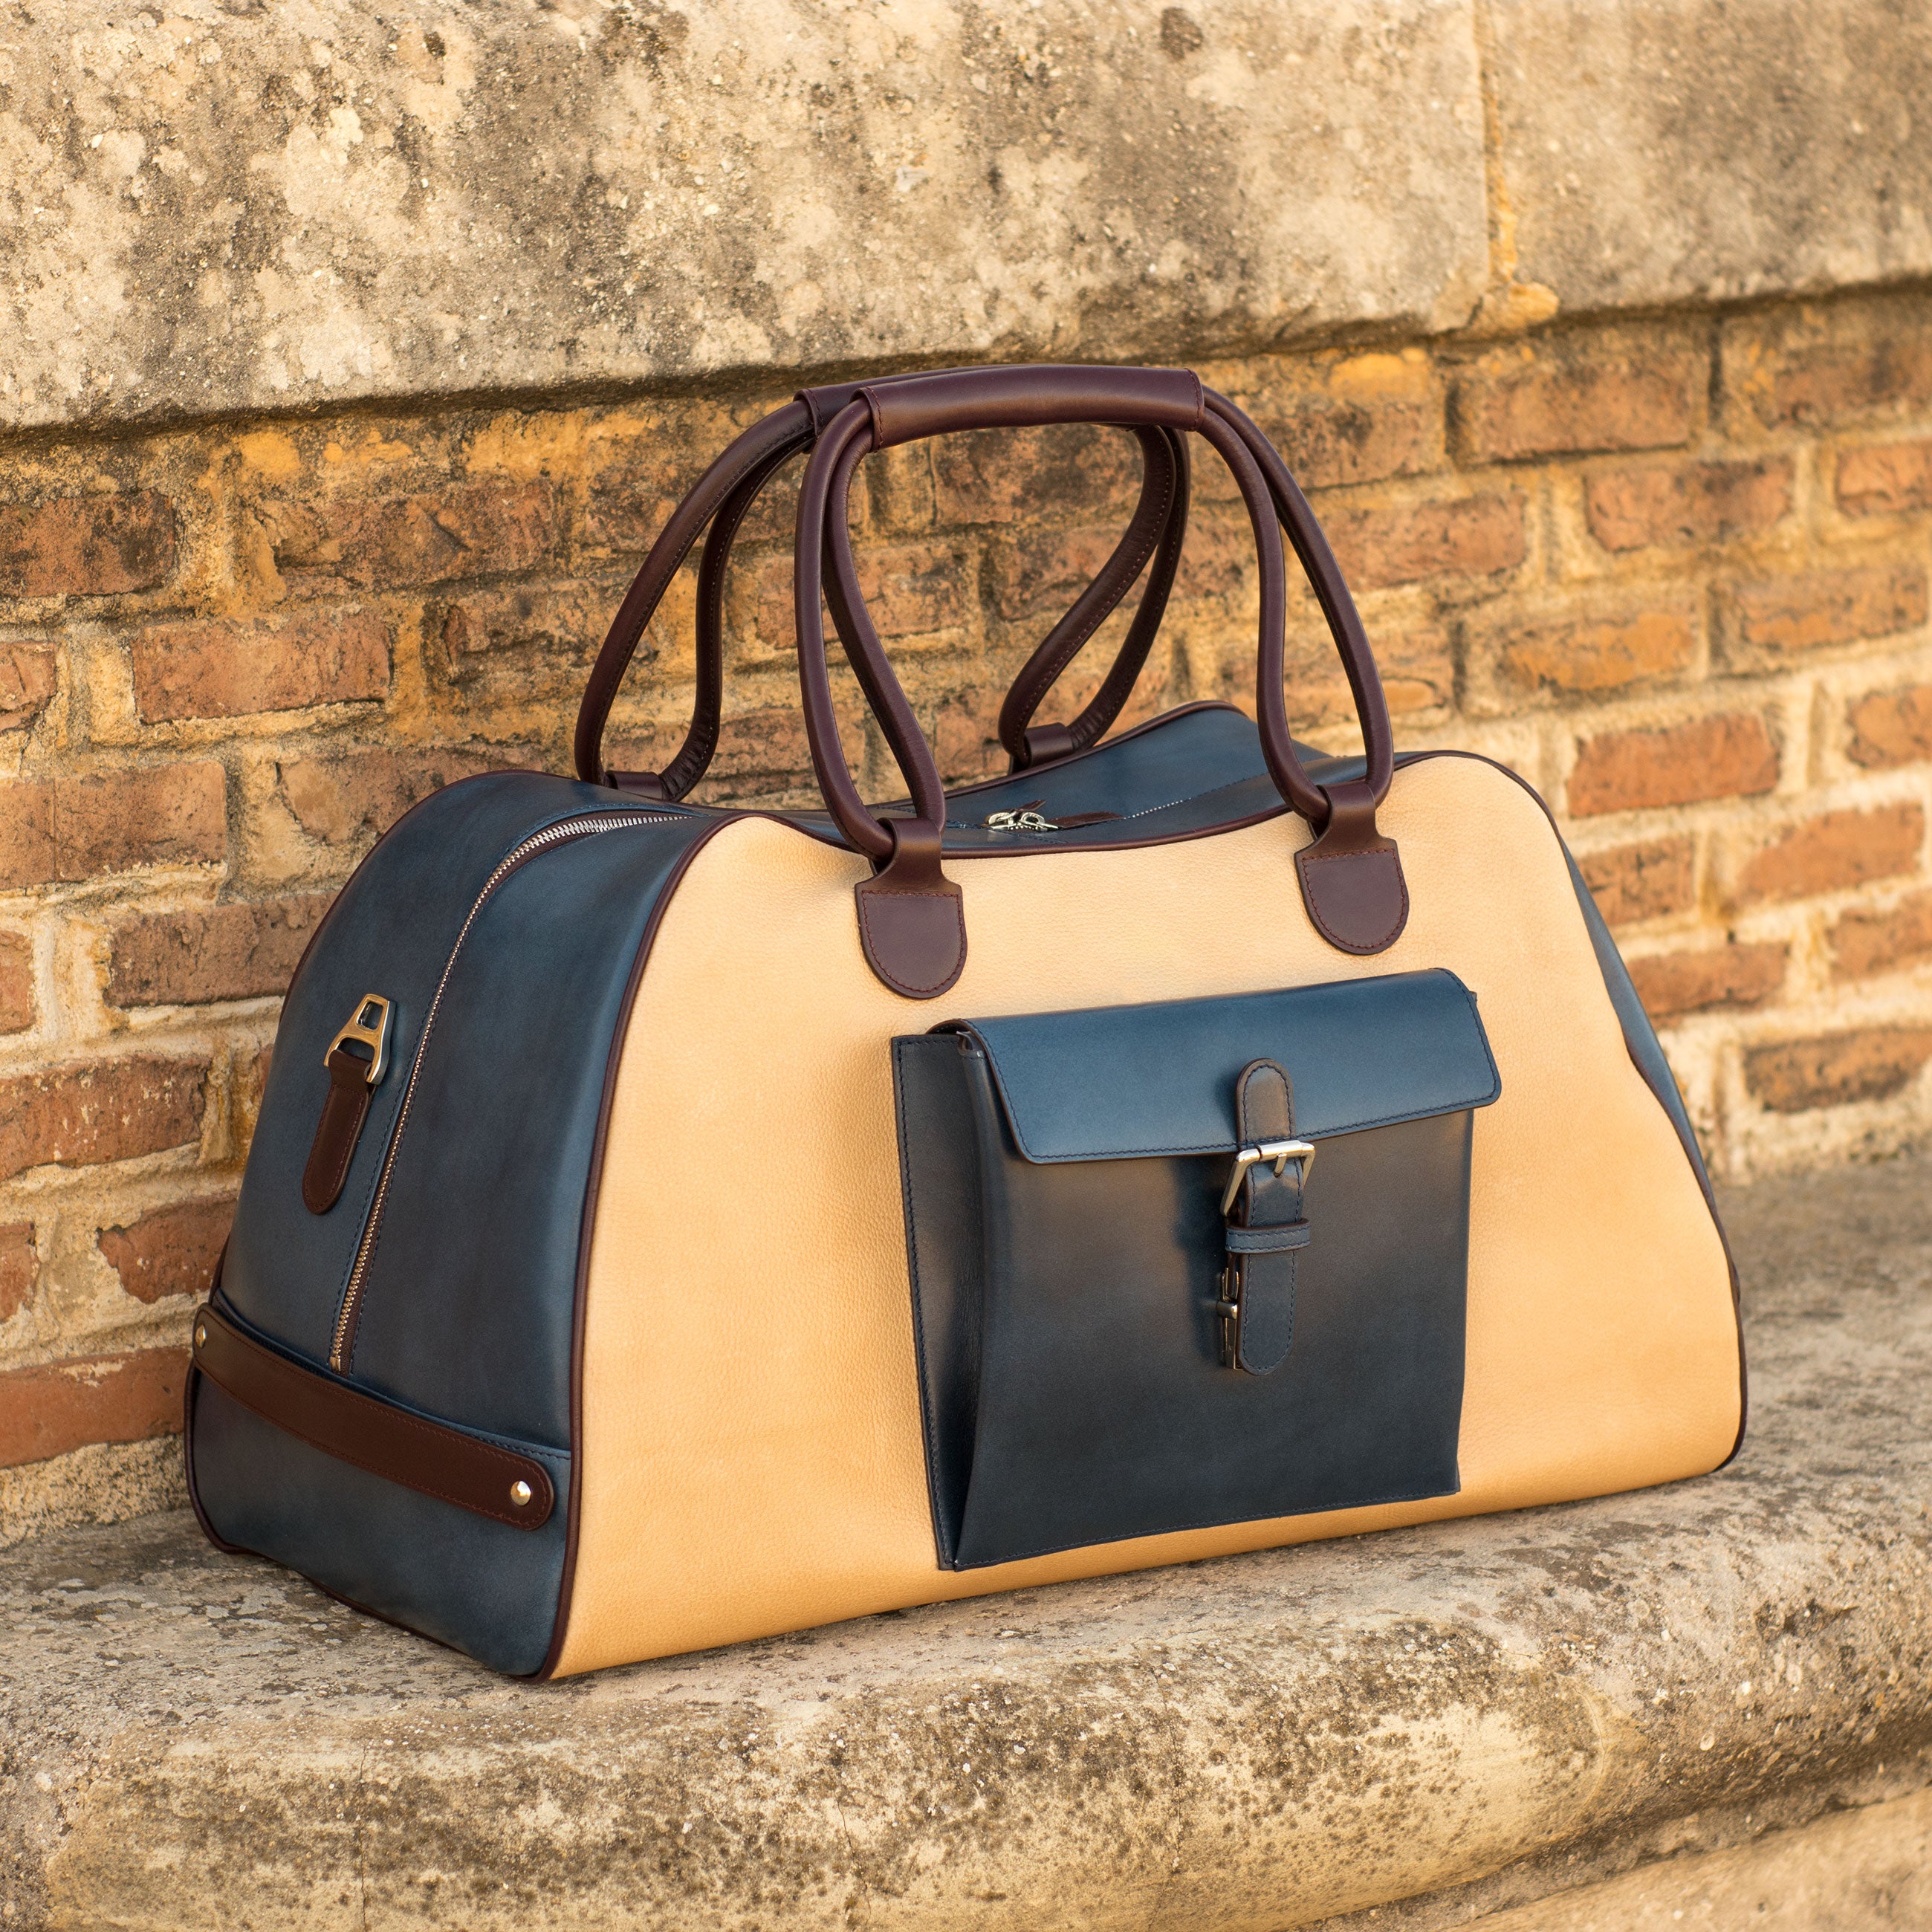 Fawn & Navy Painted Calf Travel Duffle